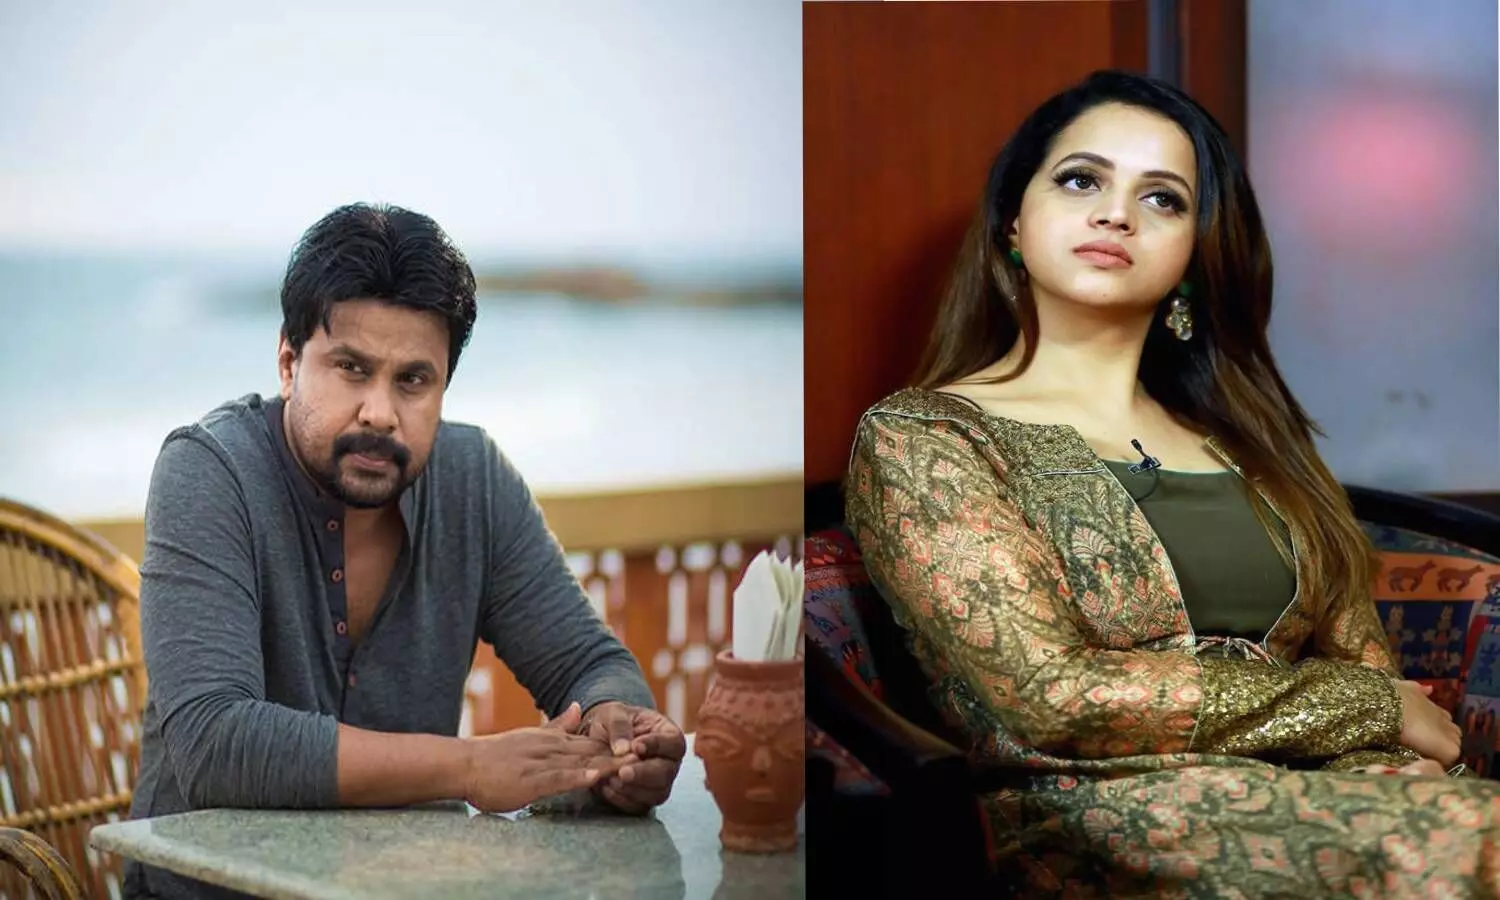 It wasnt easy: Bhavana Menon opens up on alleged assault by Dileep